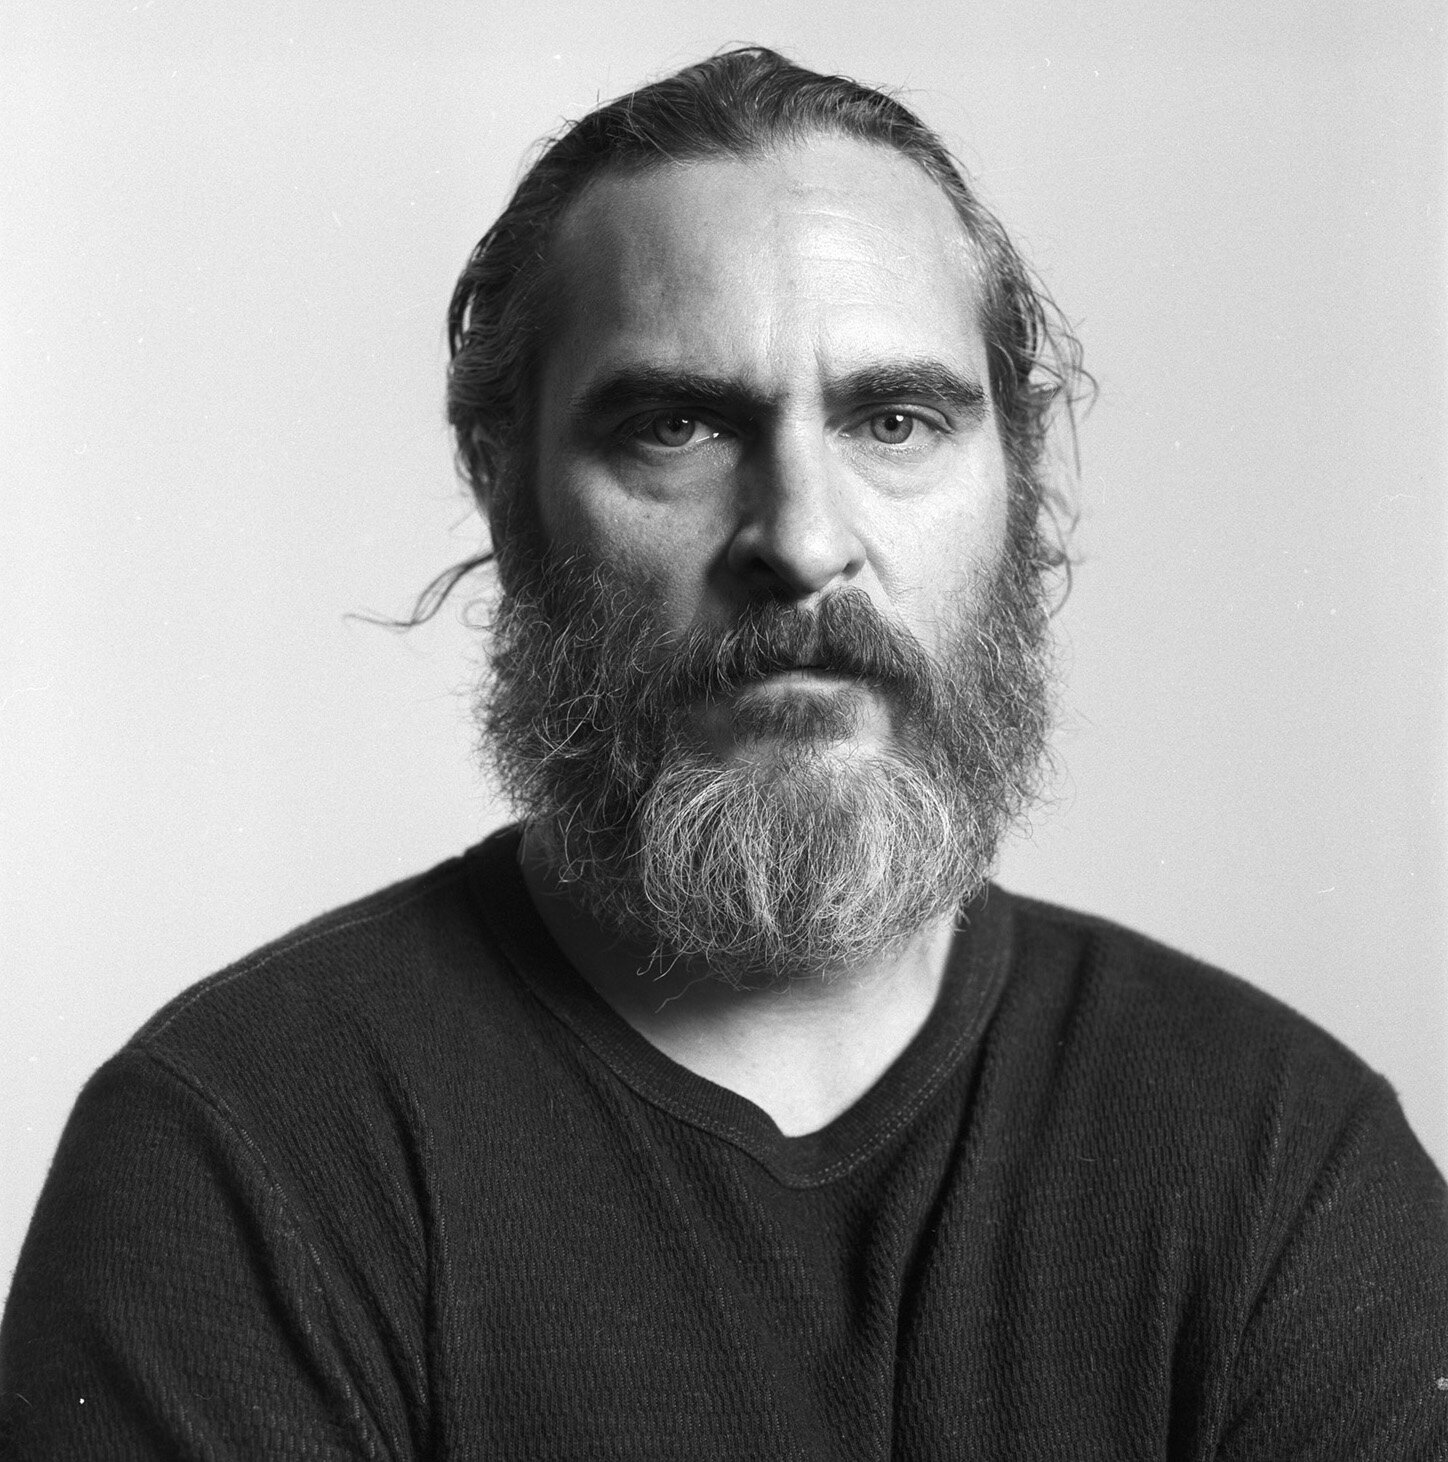 Joaquin Phoenix, "You Were Never Really Here"